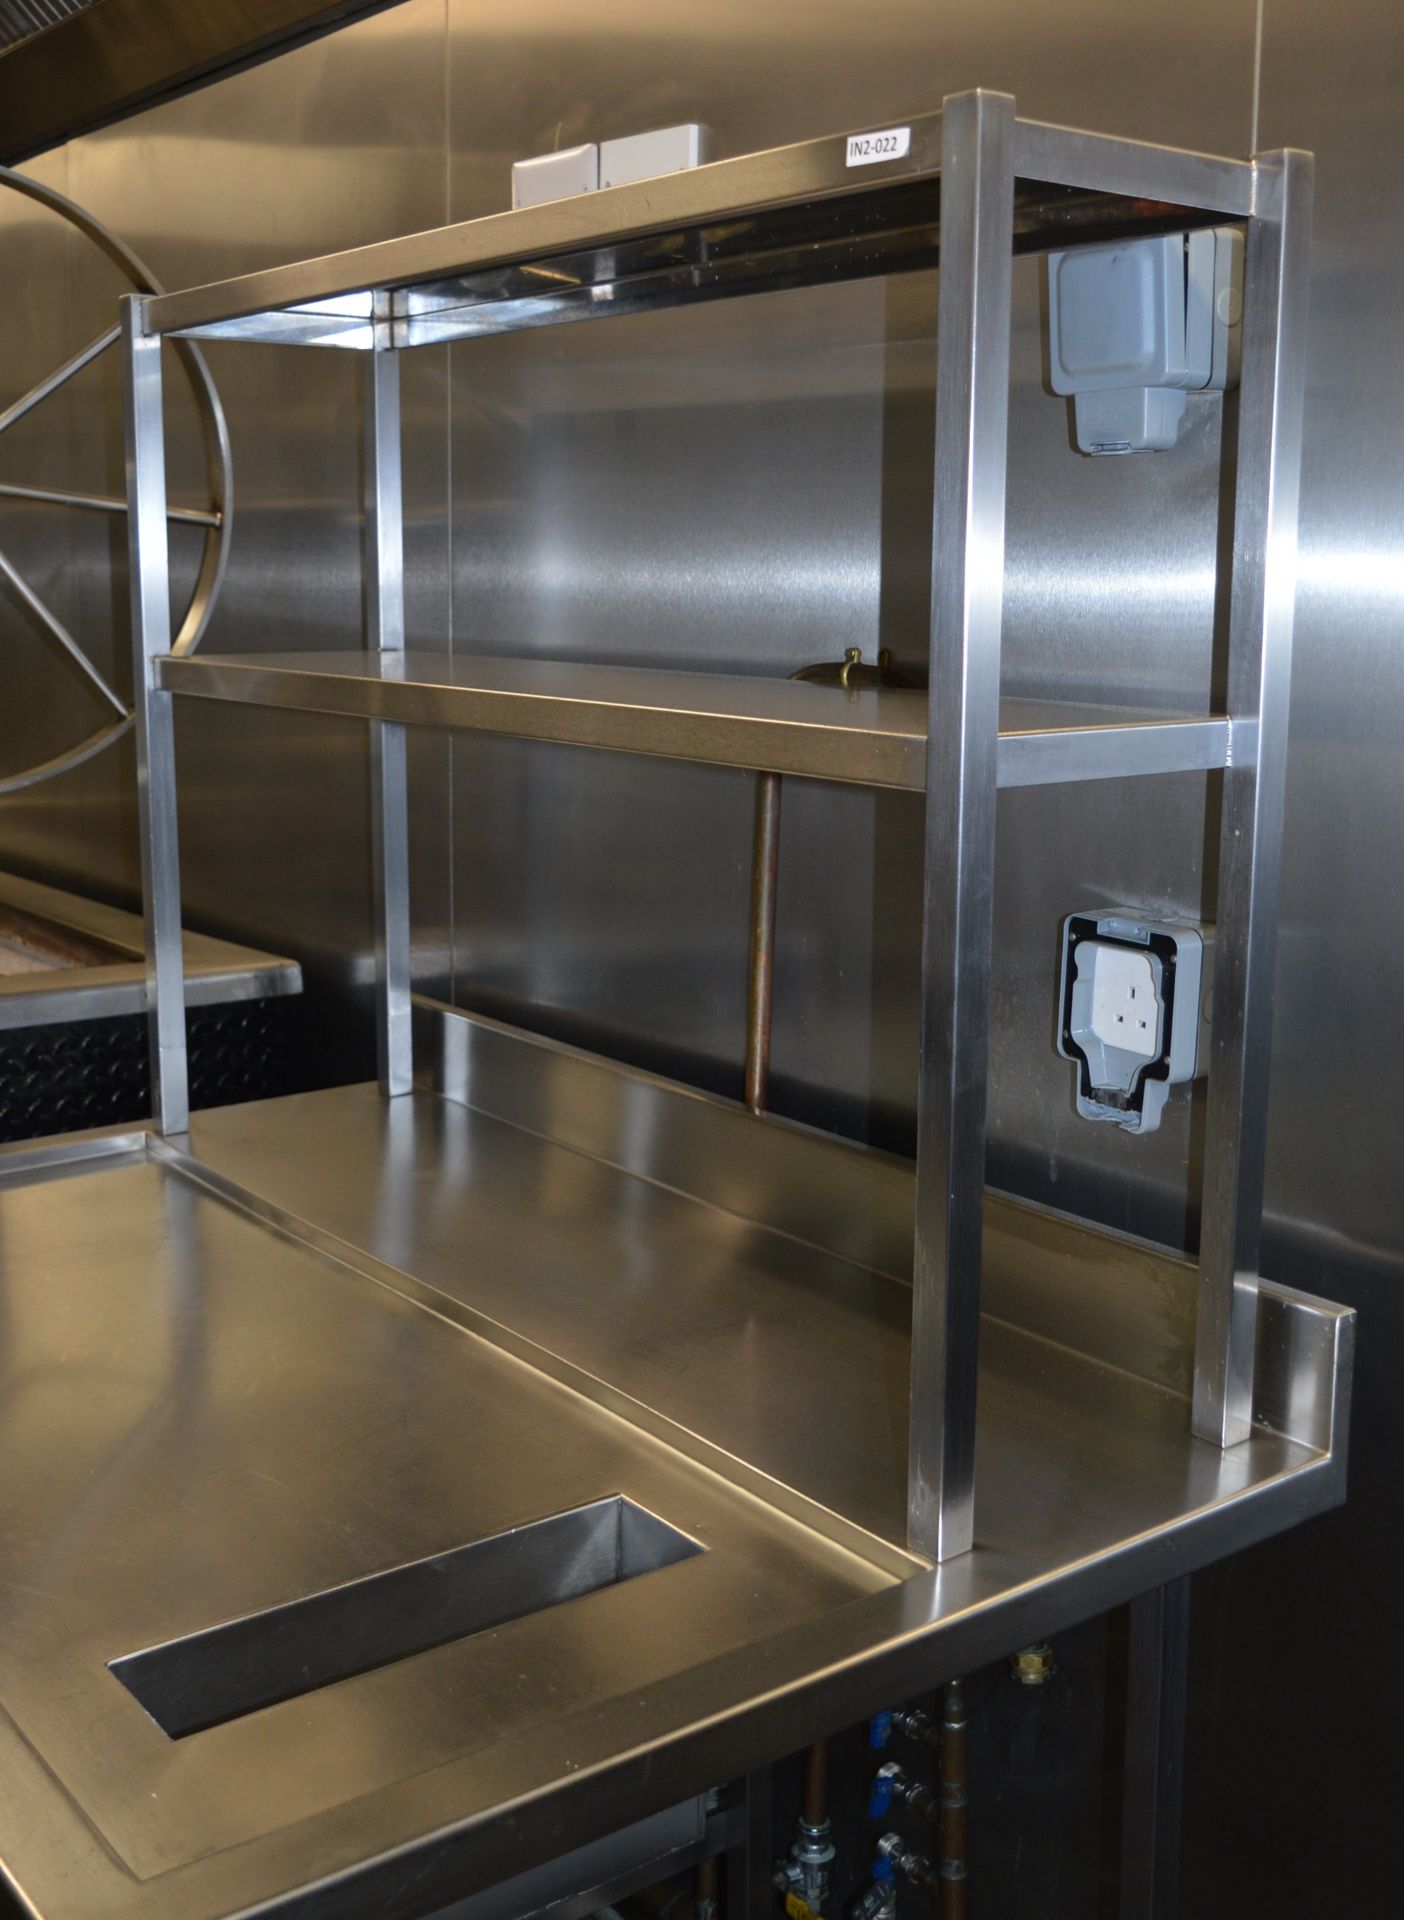 1 x Stainless Steel Prep Bench With Undercounter Shelves, Bin Chute and Overhead Shelves - H87/171 x - Image 6 of 7